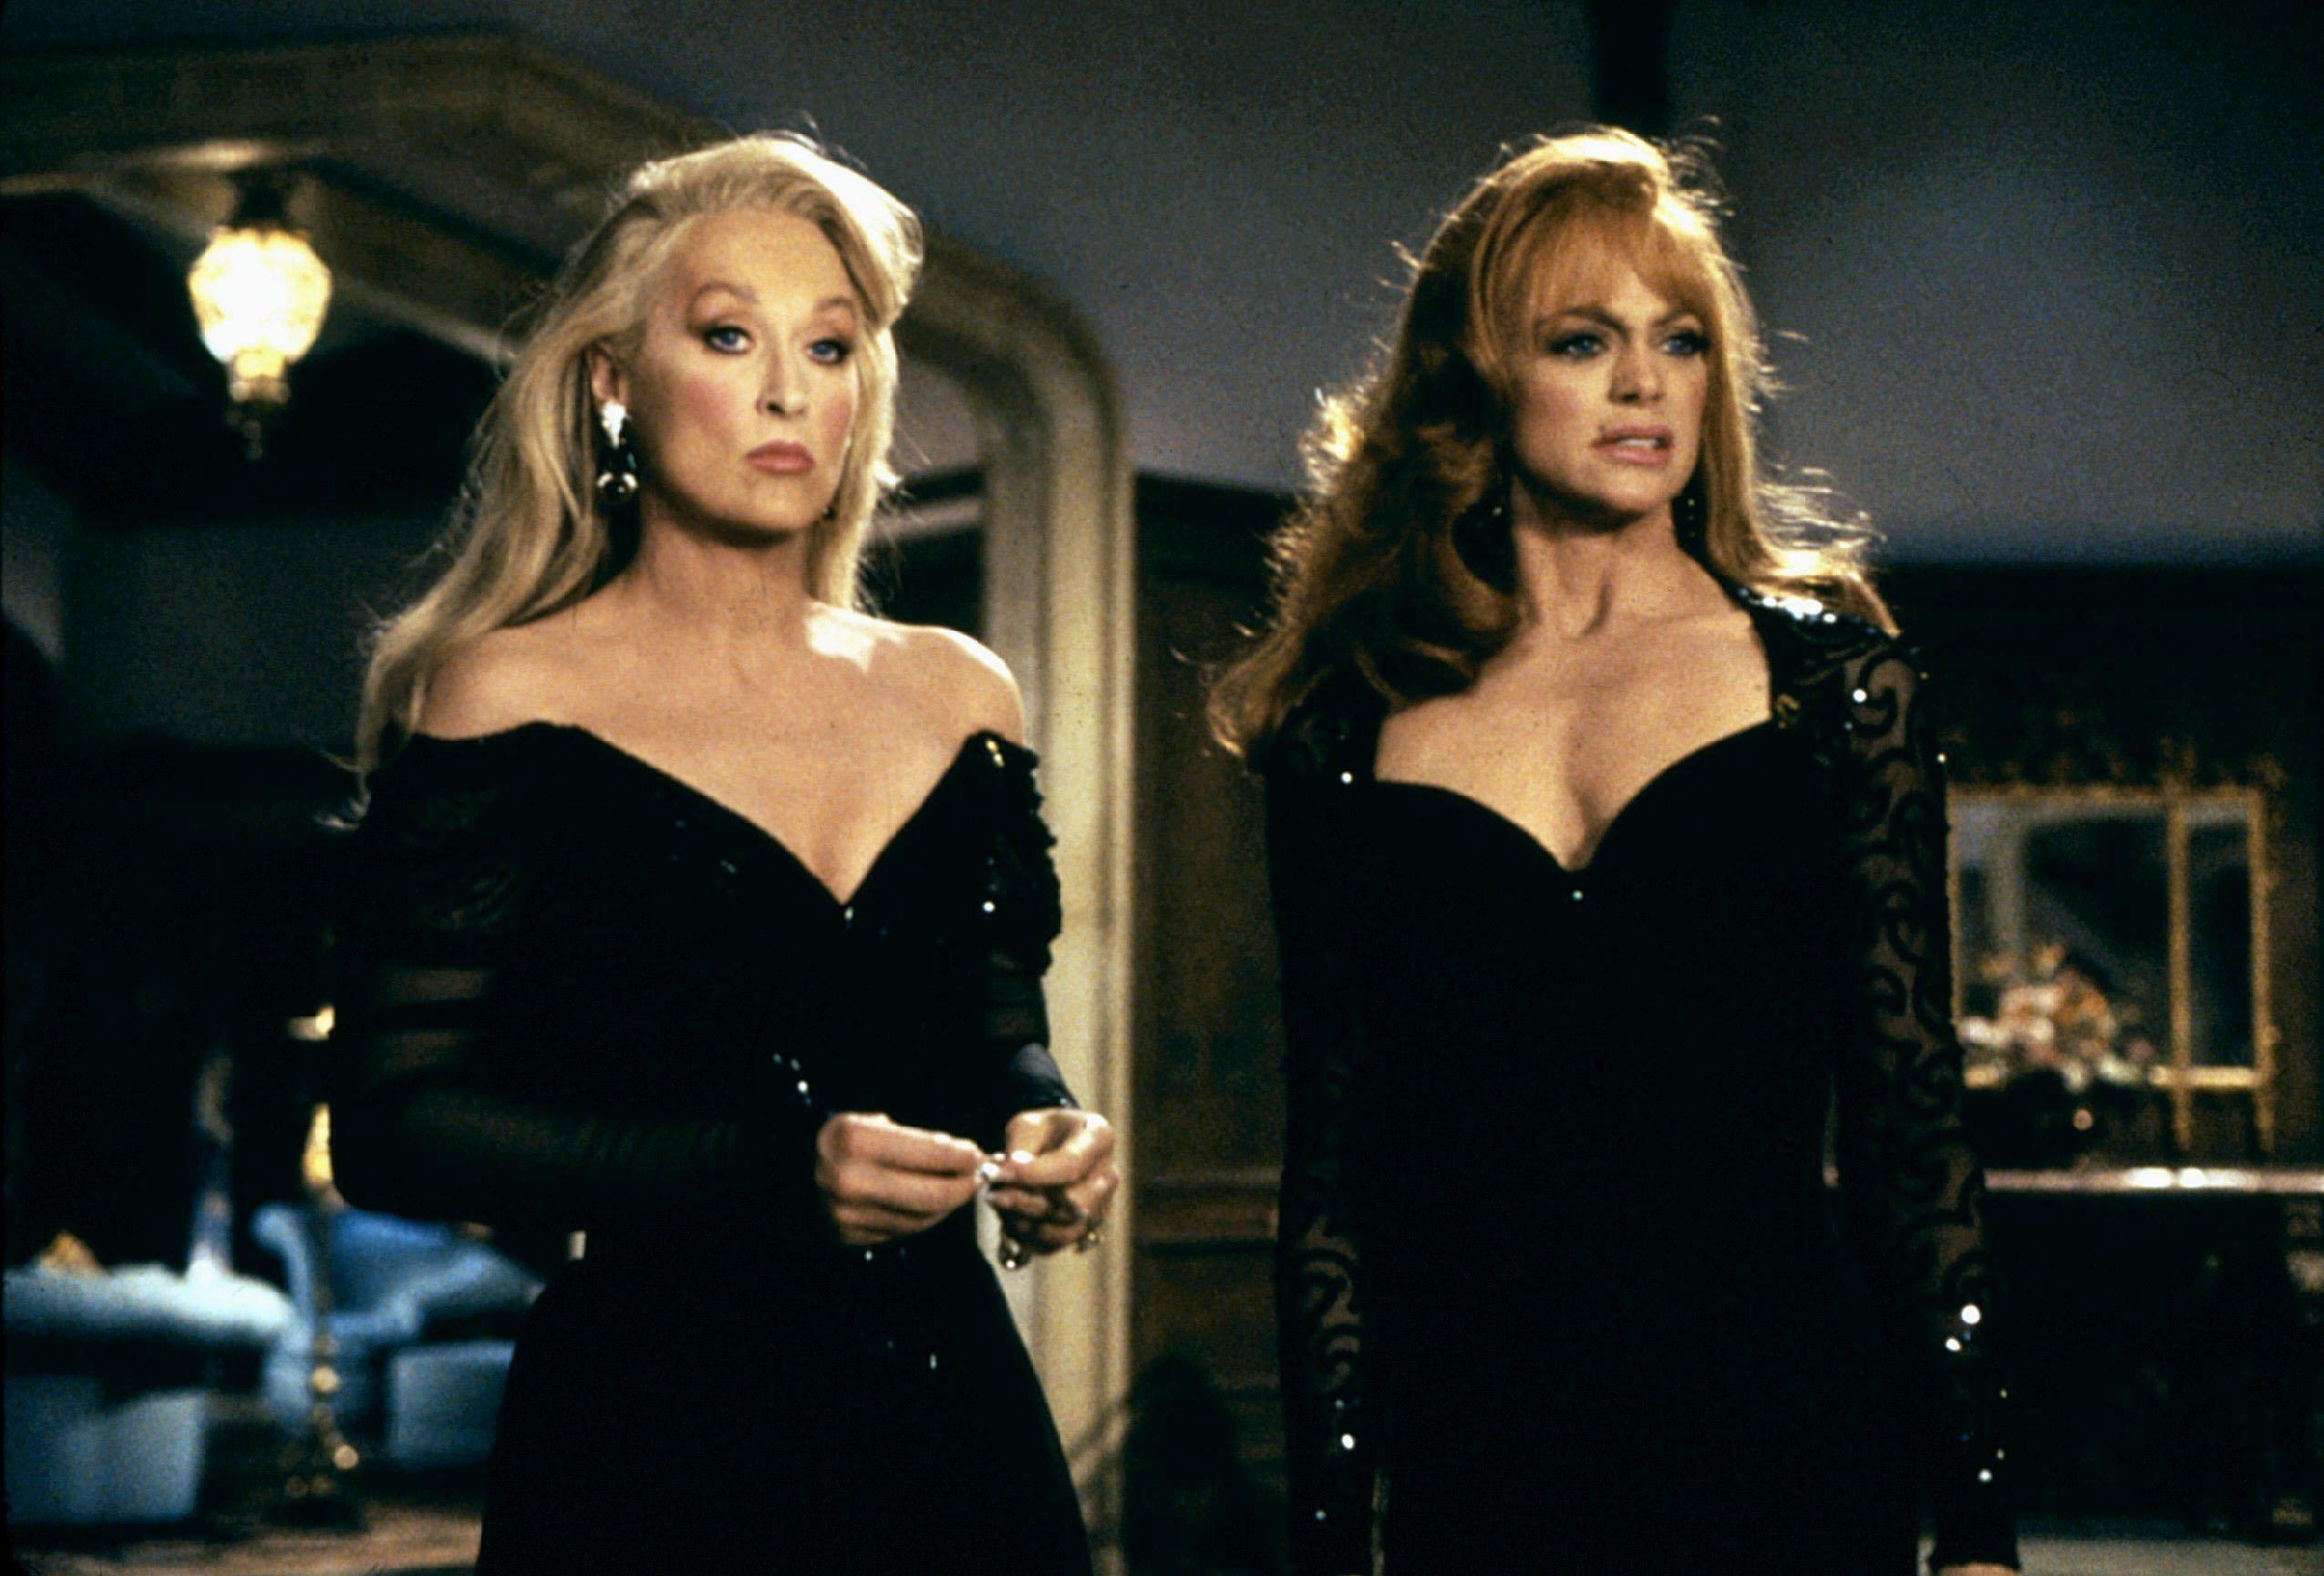 Meryl Streep and Goldie Hawn in “Death Becomes Her”